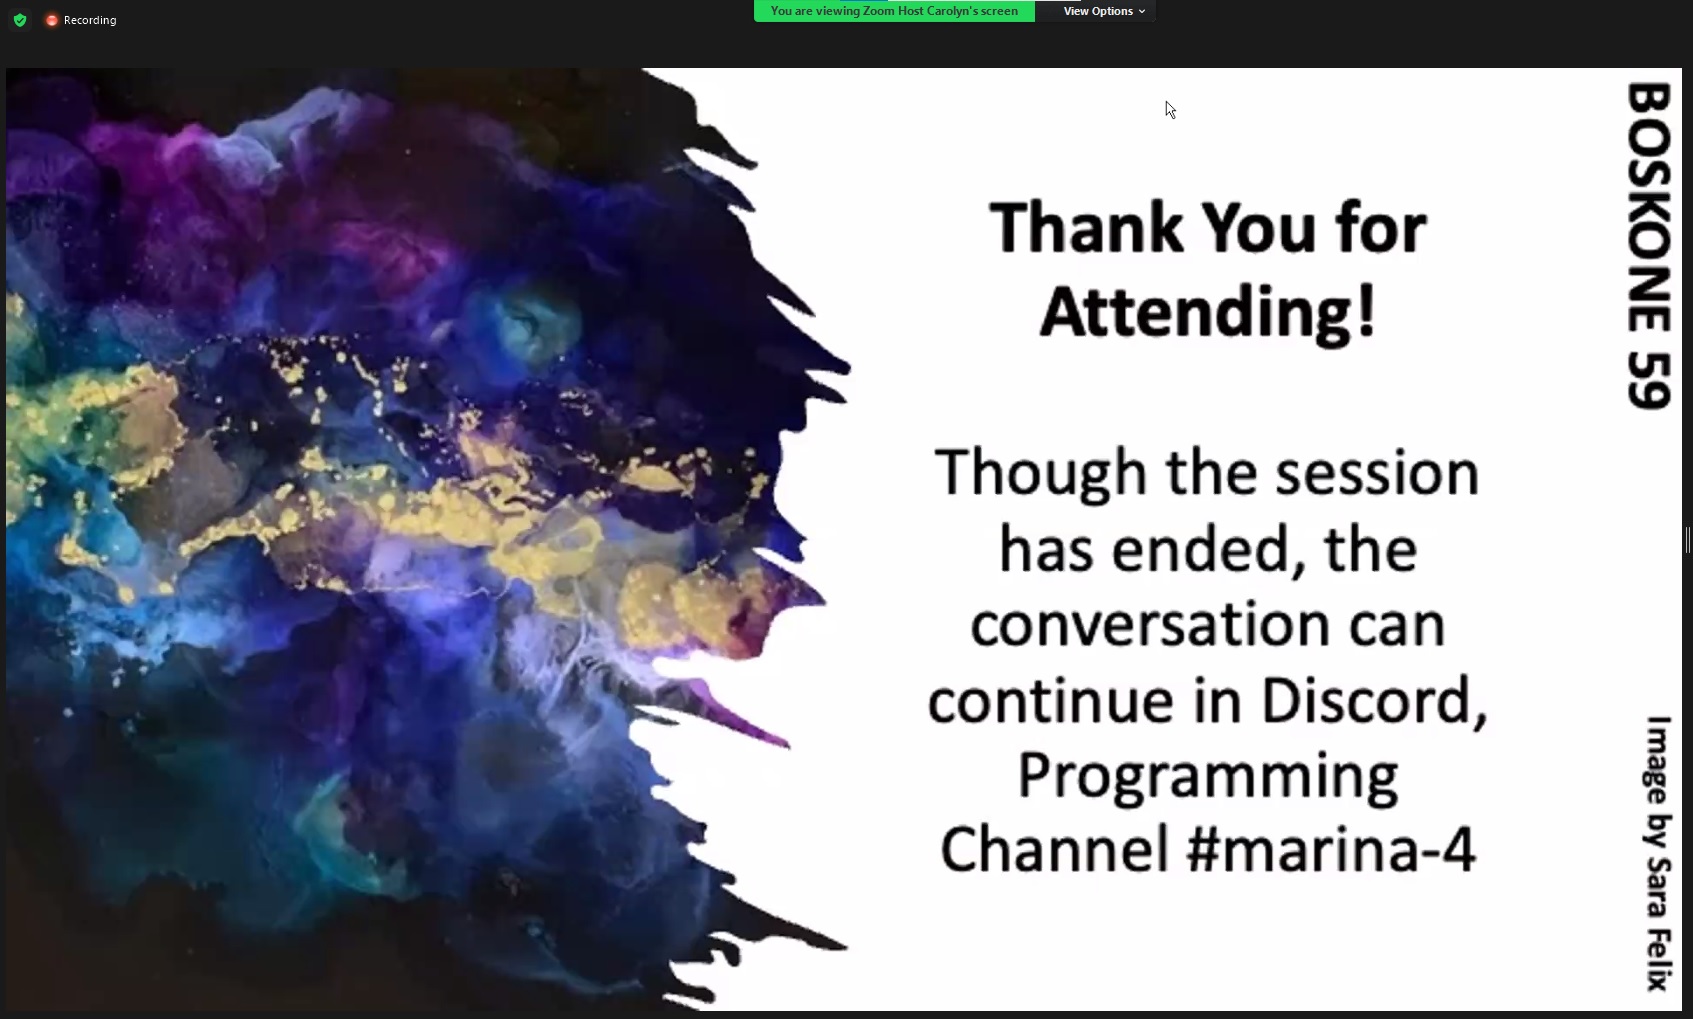 Picture thanking ffor attending a panel. To the lefts there is a  shape in blue, violet, yellow and green colours. To the right there is thanking for attendance and informing where the discussion may be continued.